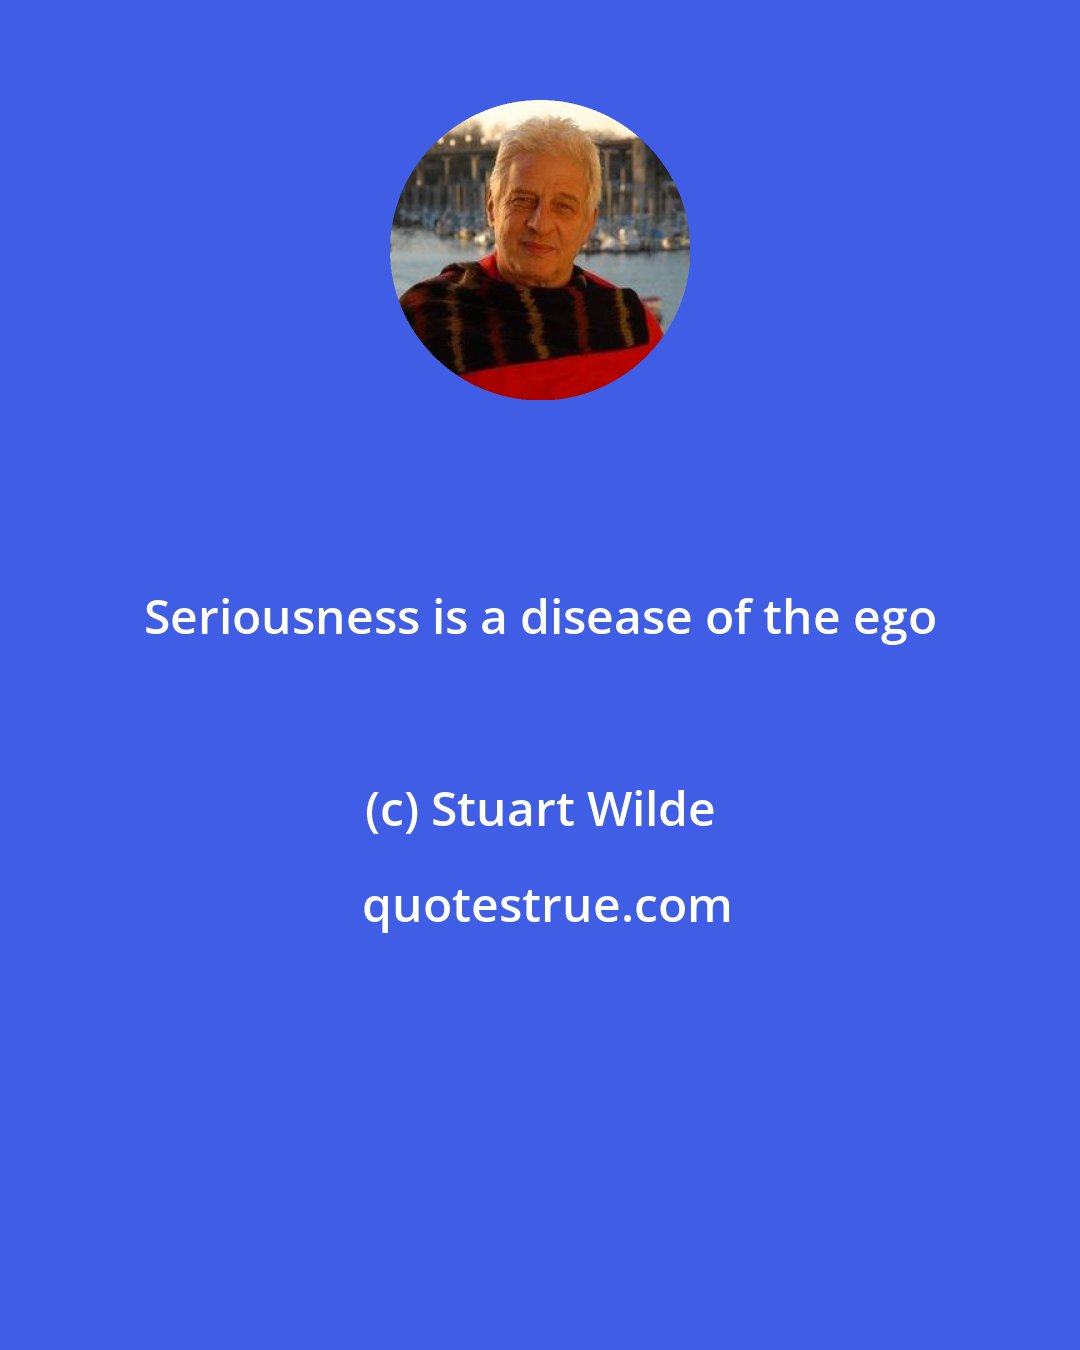 Stuart Wilde: Seriousness is a disease of the ego